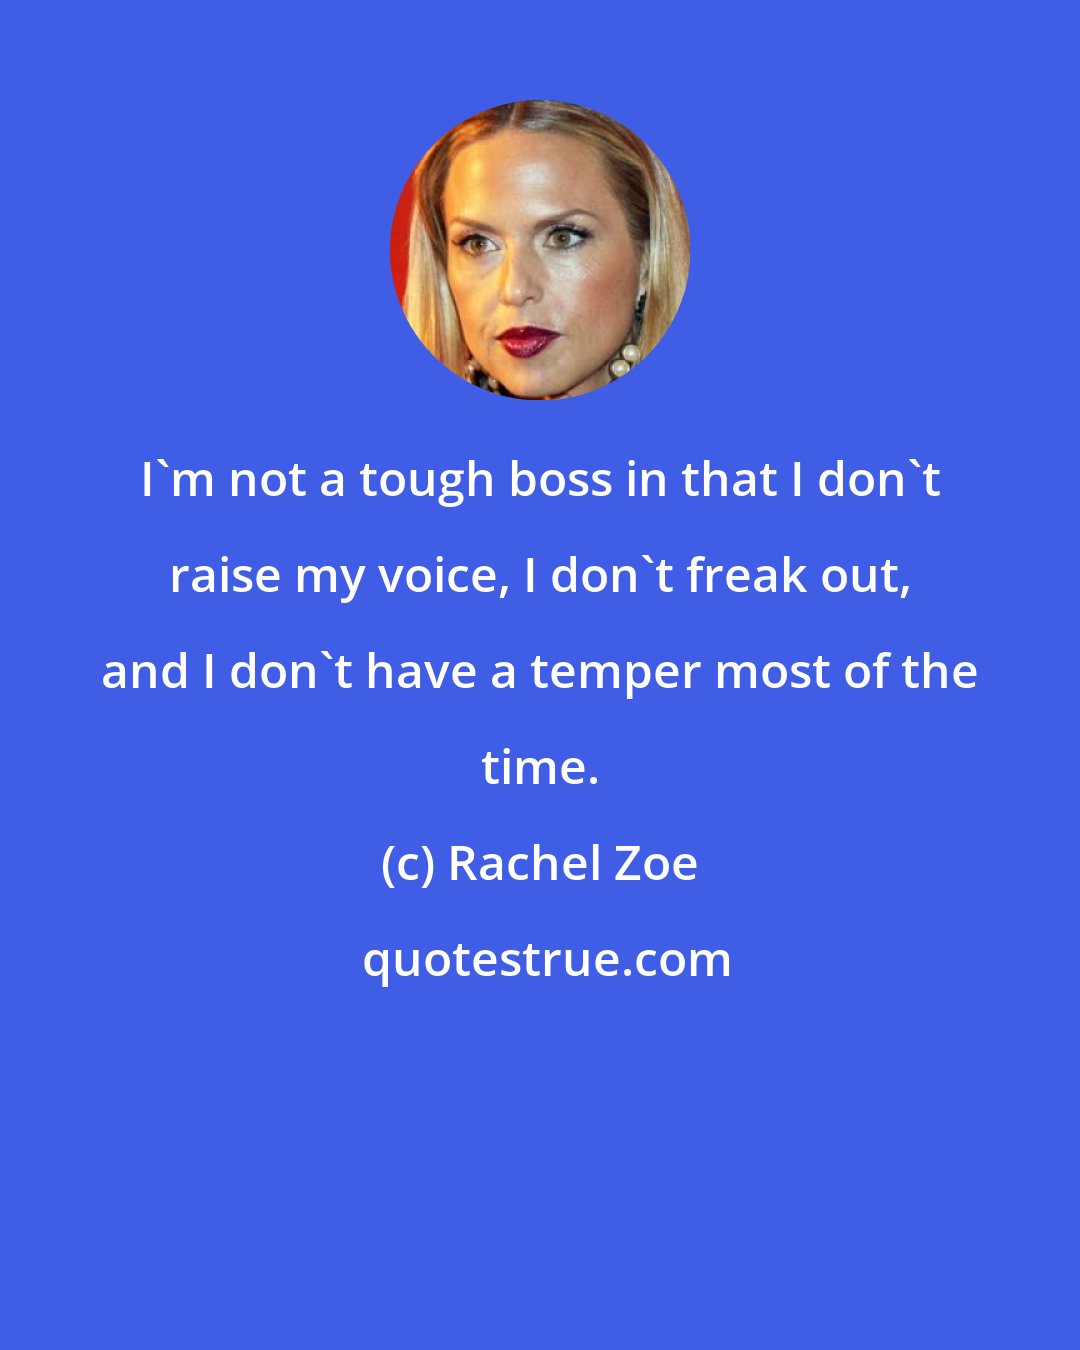 Rachel Zoe: I'm not a tough boss in that I don't raise my voice, I don't freak out, and I don't have a temper most of the time.